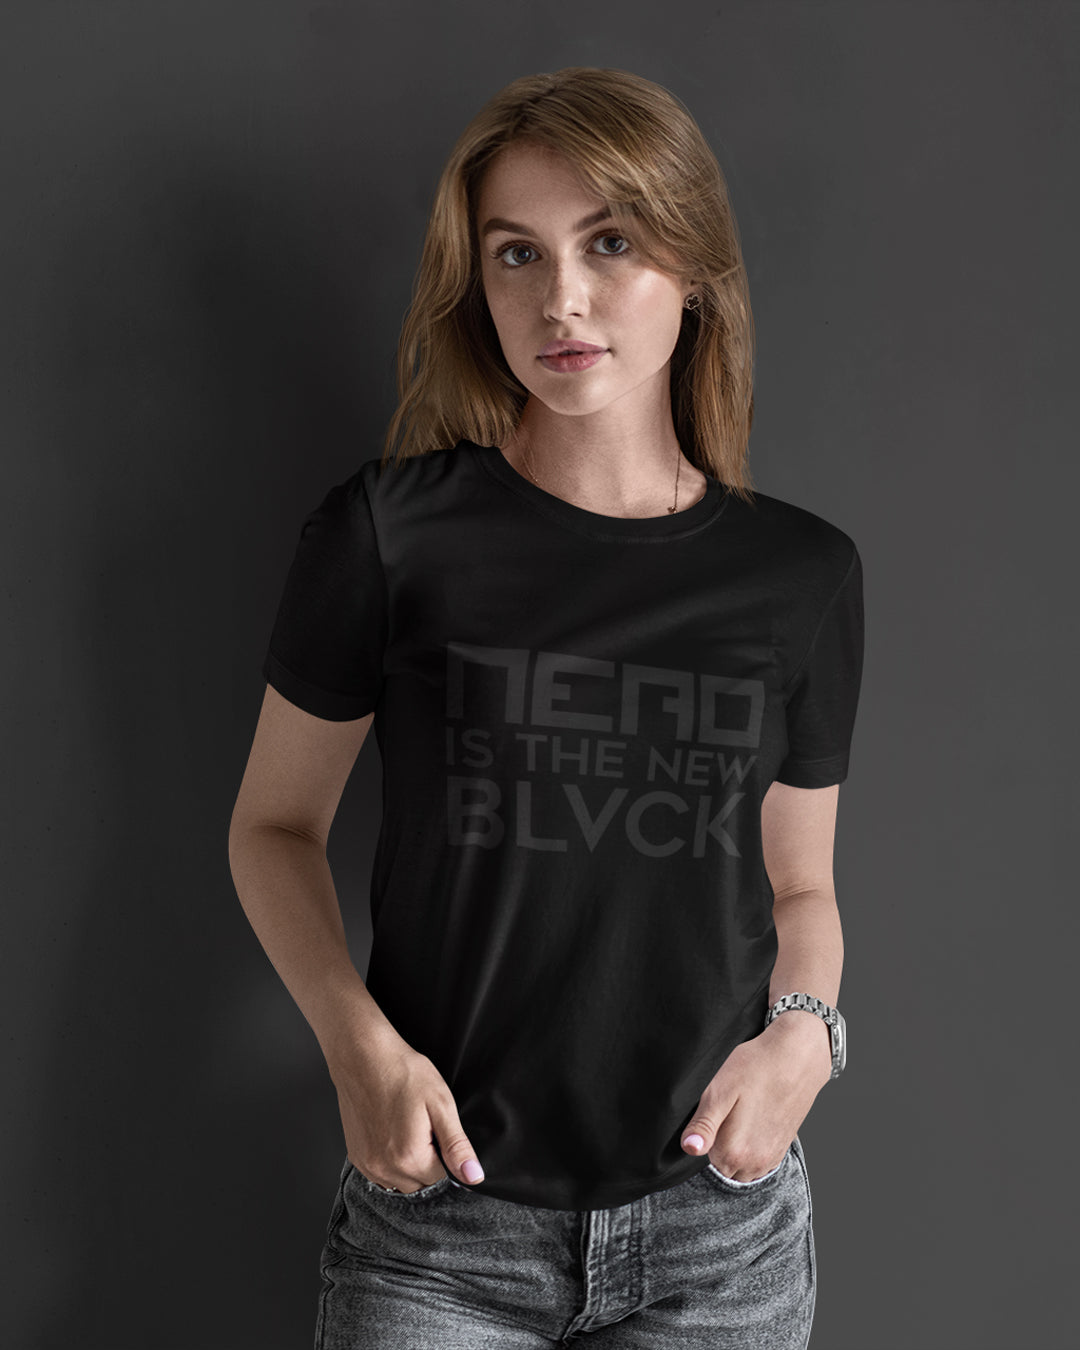 NERO IS THE NEW BLVCK - Women's Relaxed Black T-Shirt